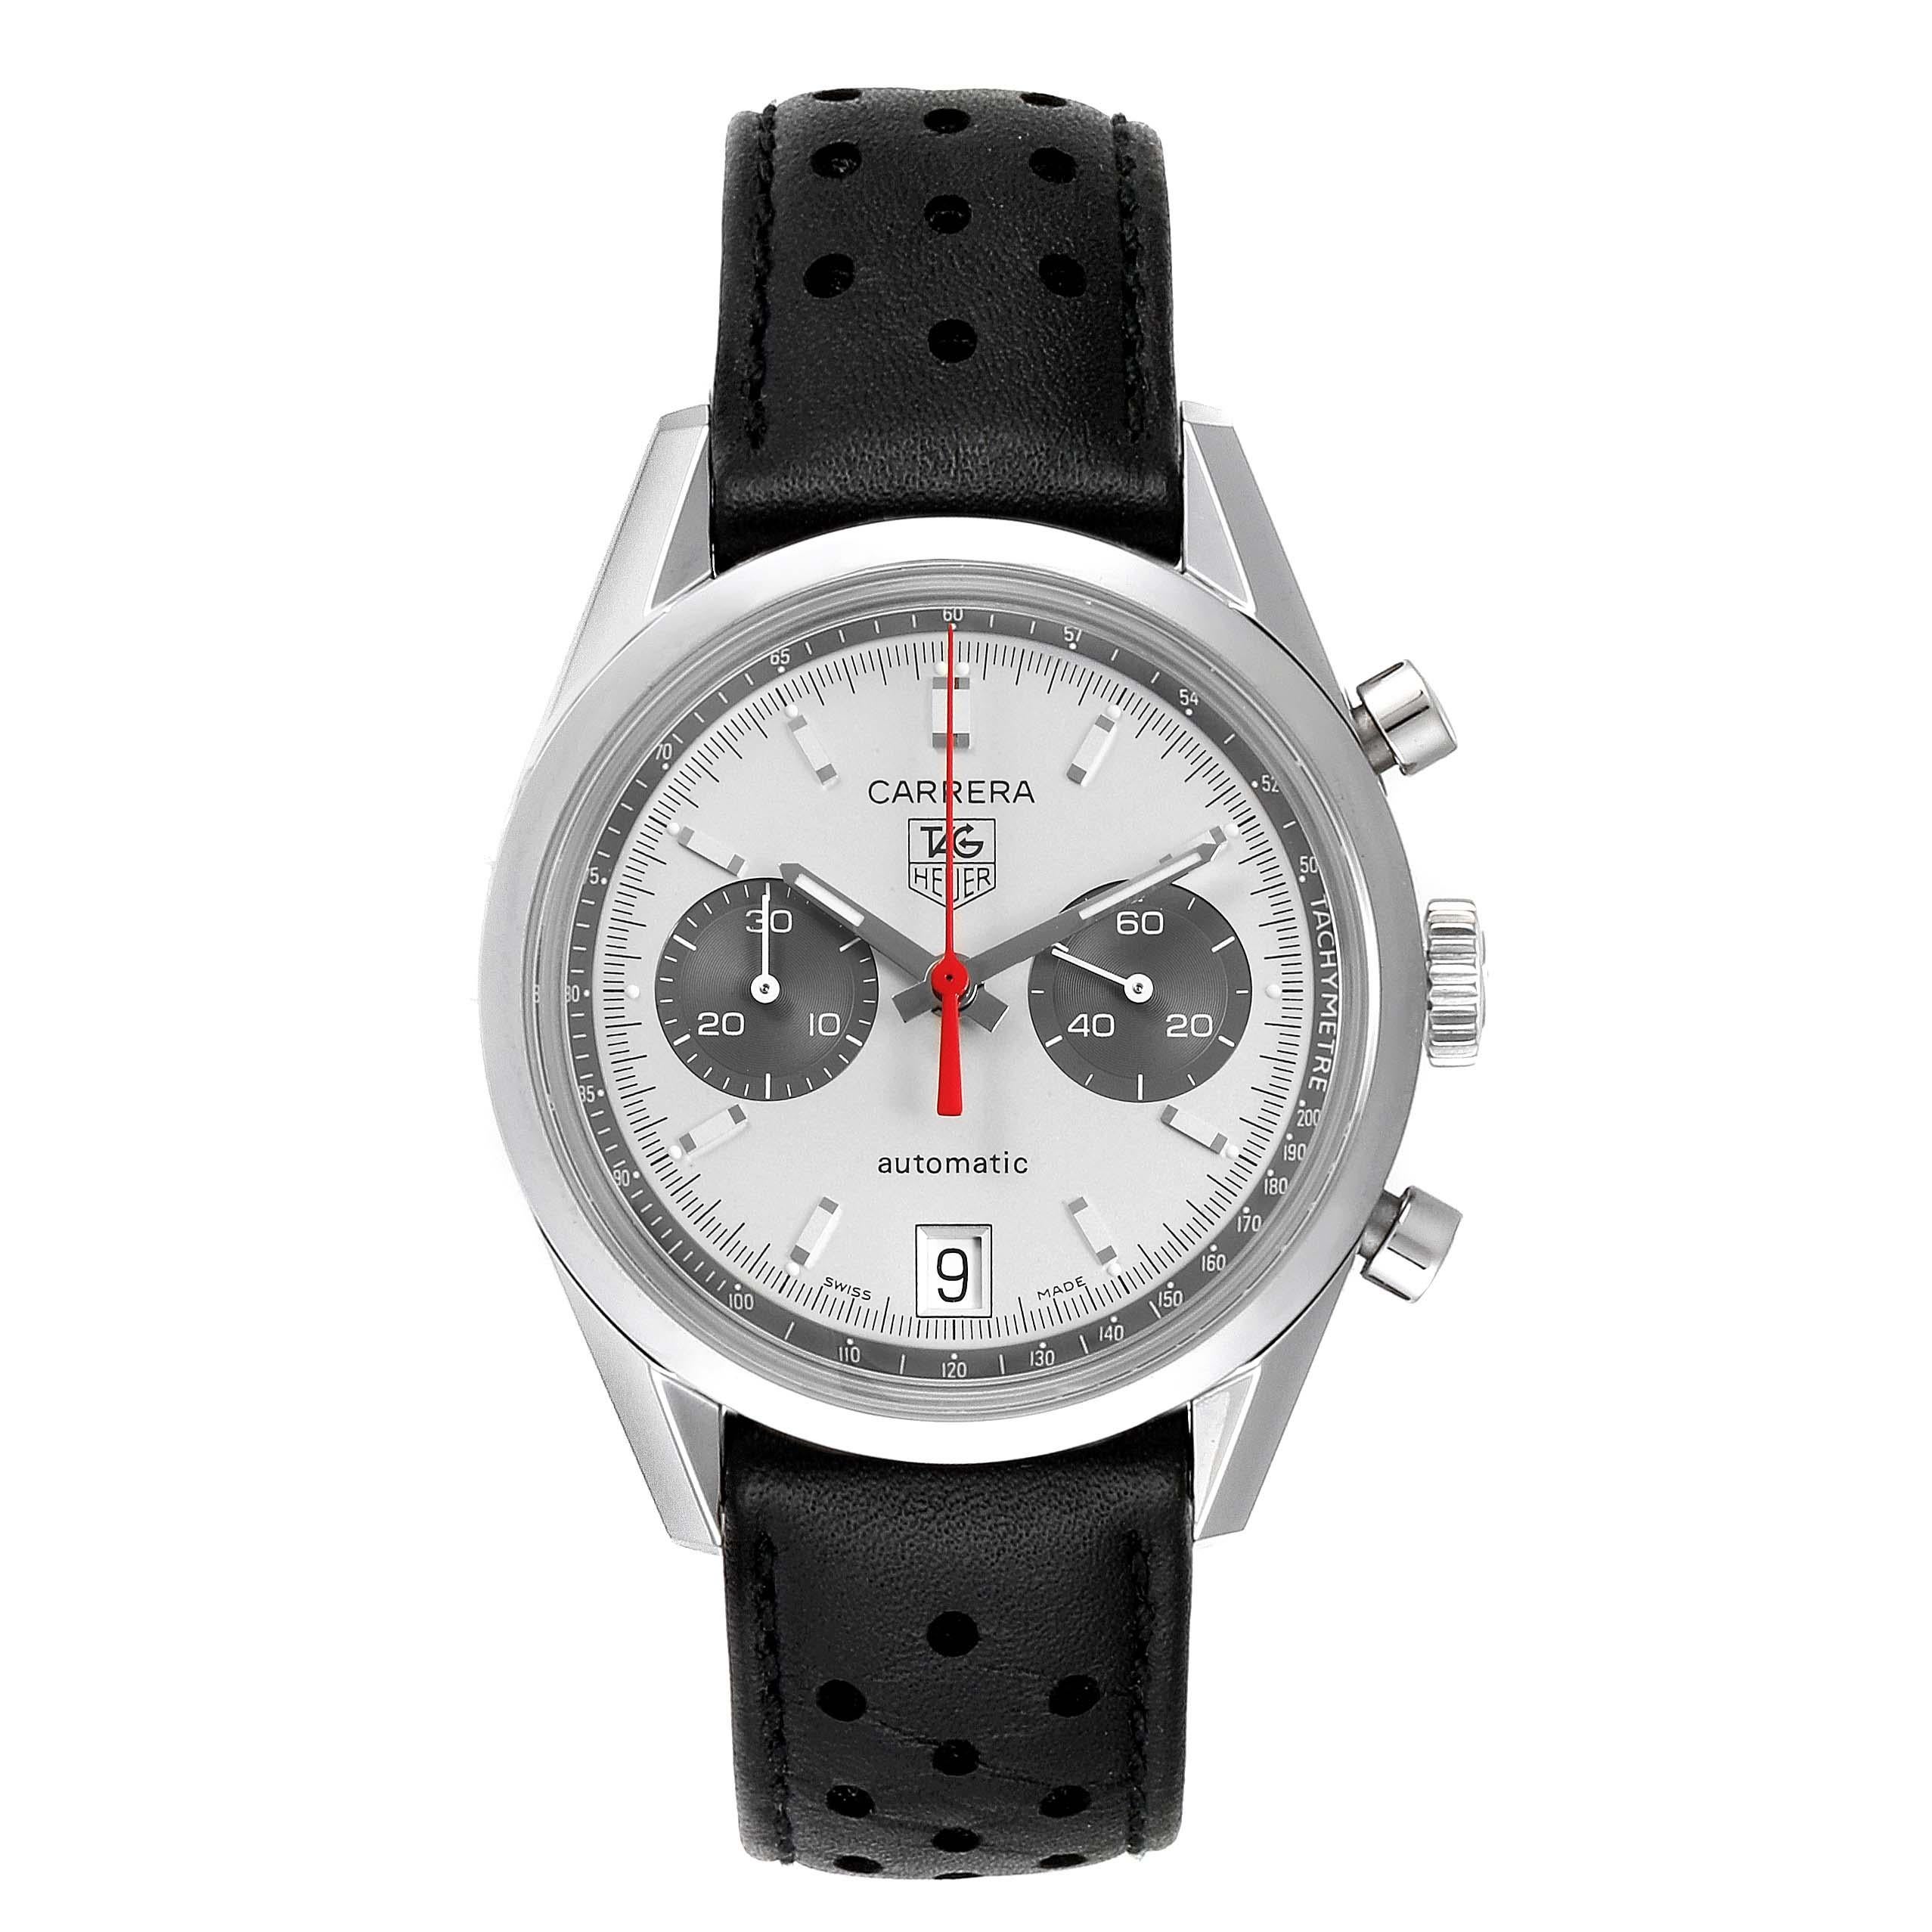 Tag Heuer Carrera Chronograph Limited Edition Mens Watch CV2117 Box Card. Automatic self-winding chronograph movement. Stainless steel case 39 mm in diameter. Stainless steel bezel. Scratch resistant sapphire crystal. Silver dial with raised baton